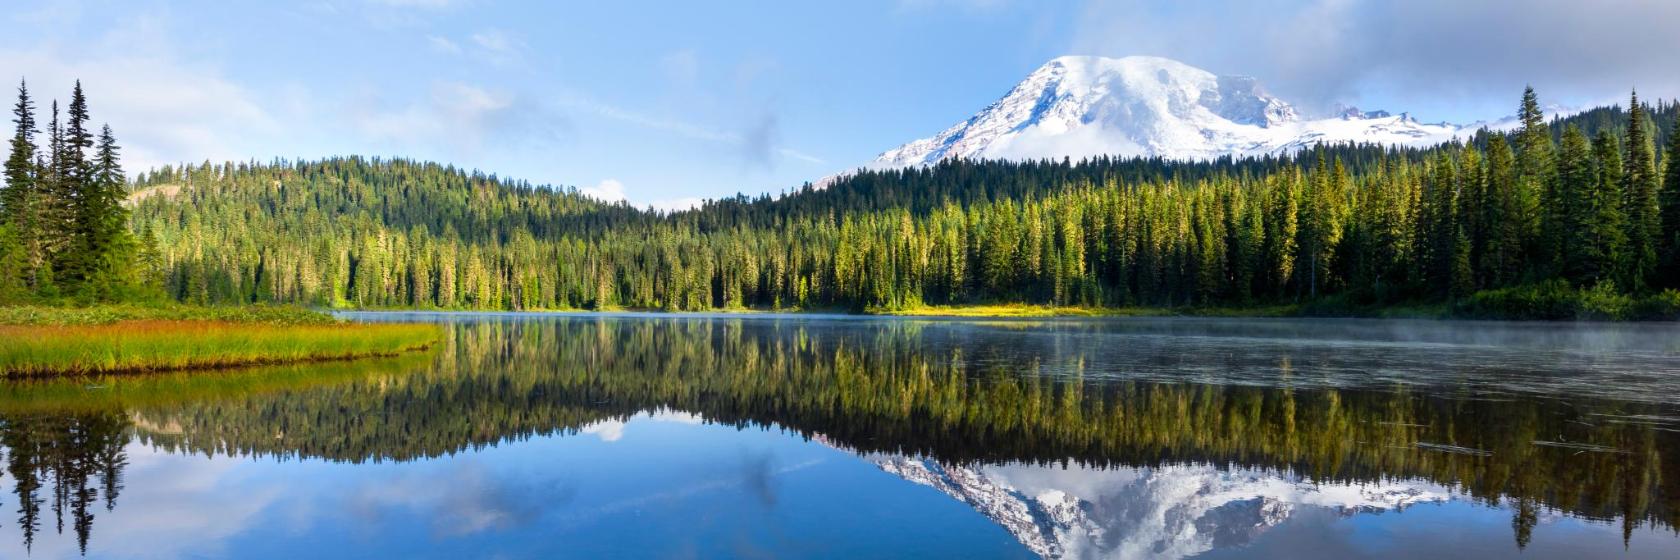 10 Top-Rated hotels in Mount Rainier National Park, United States